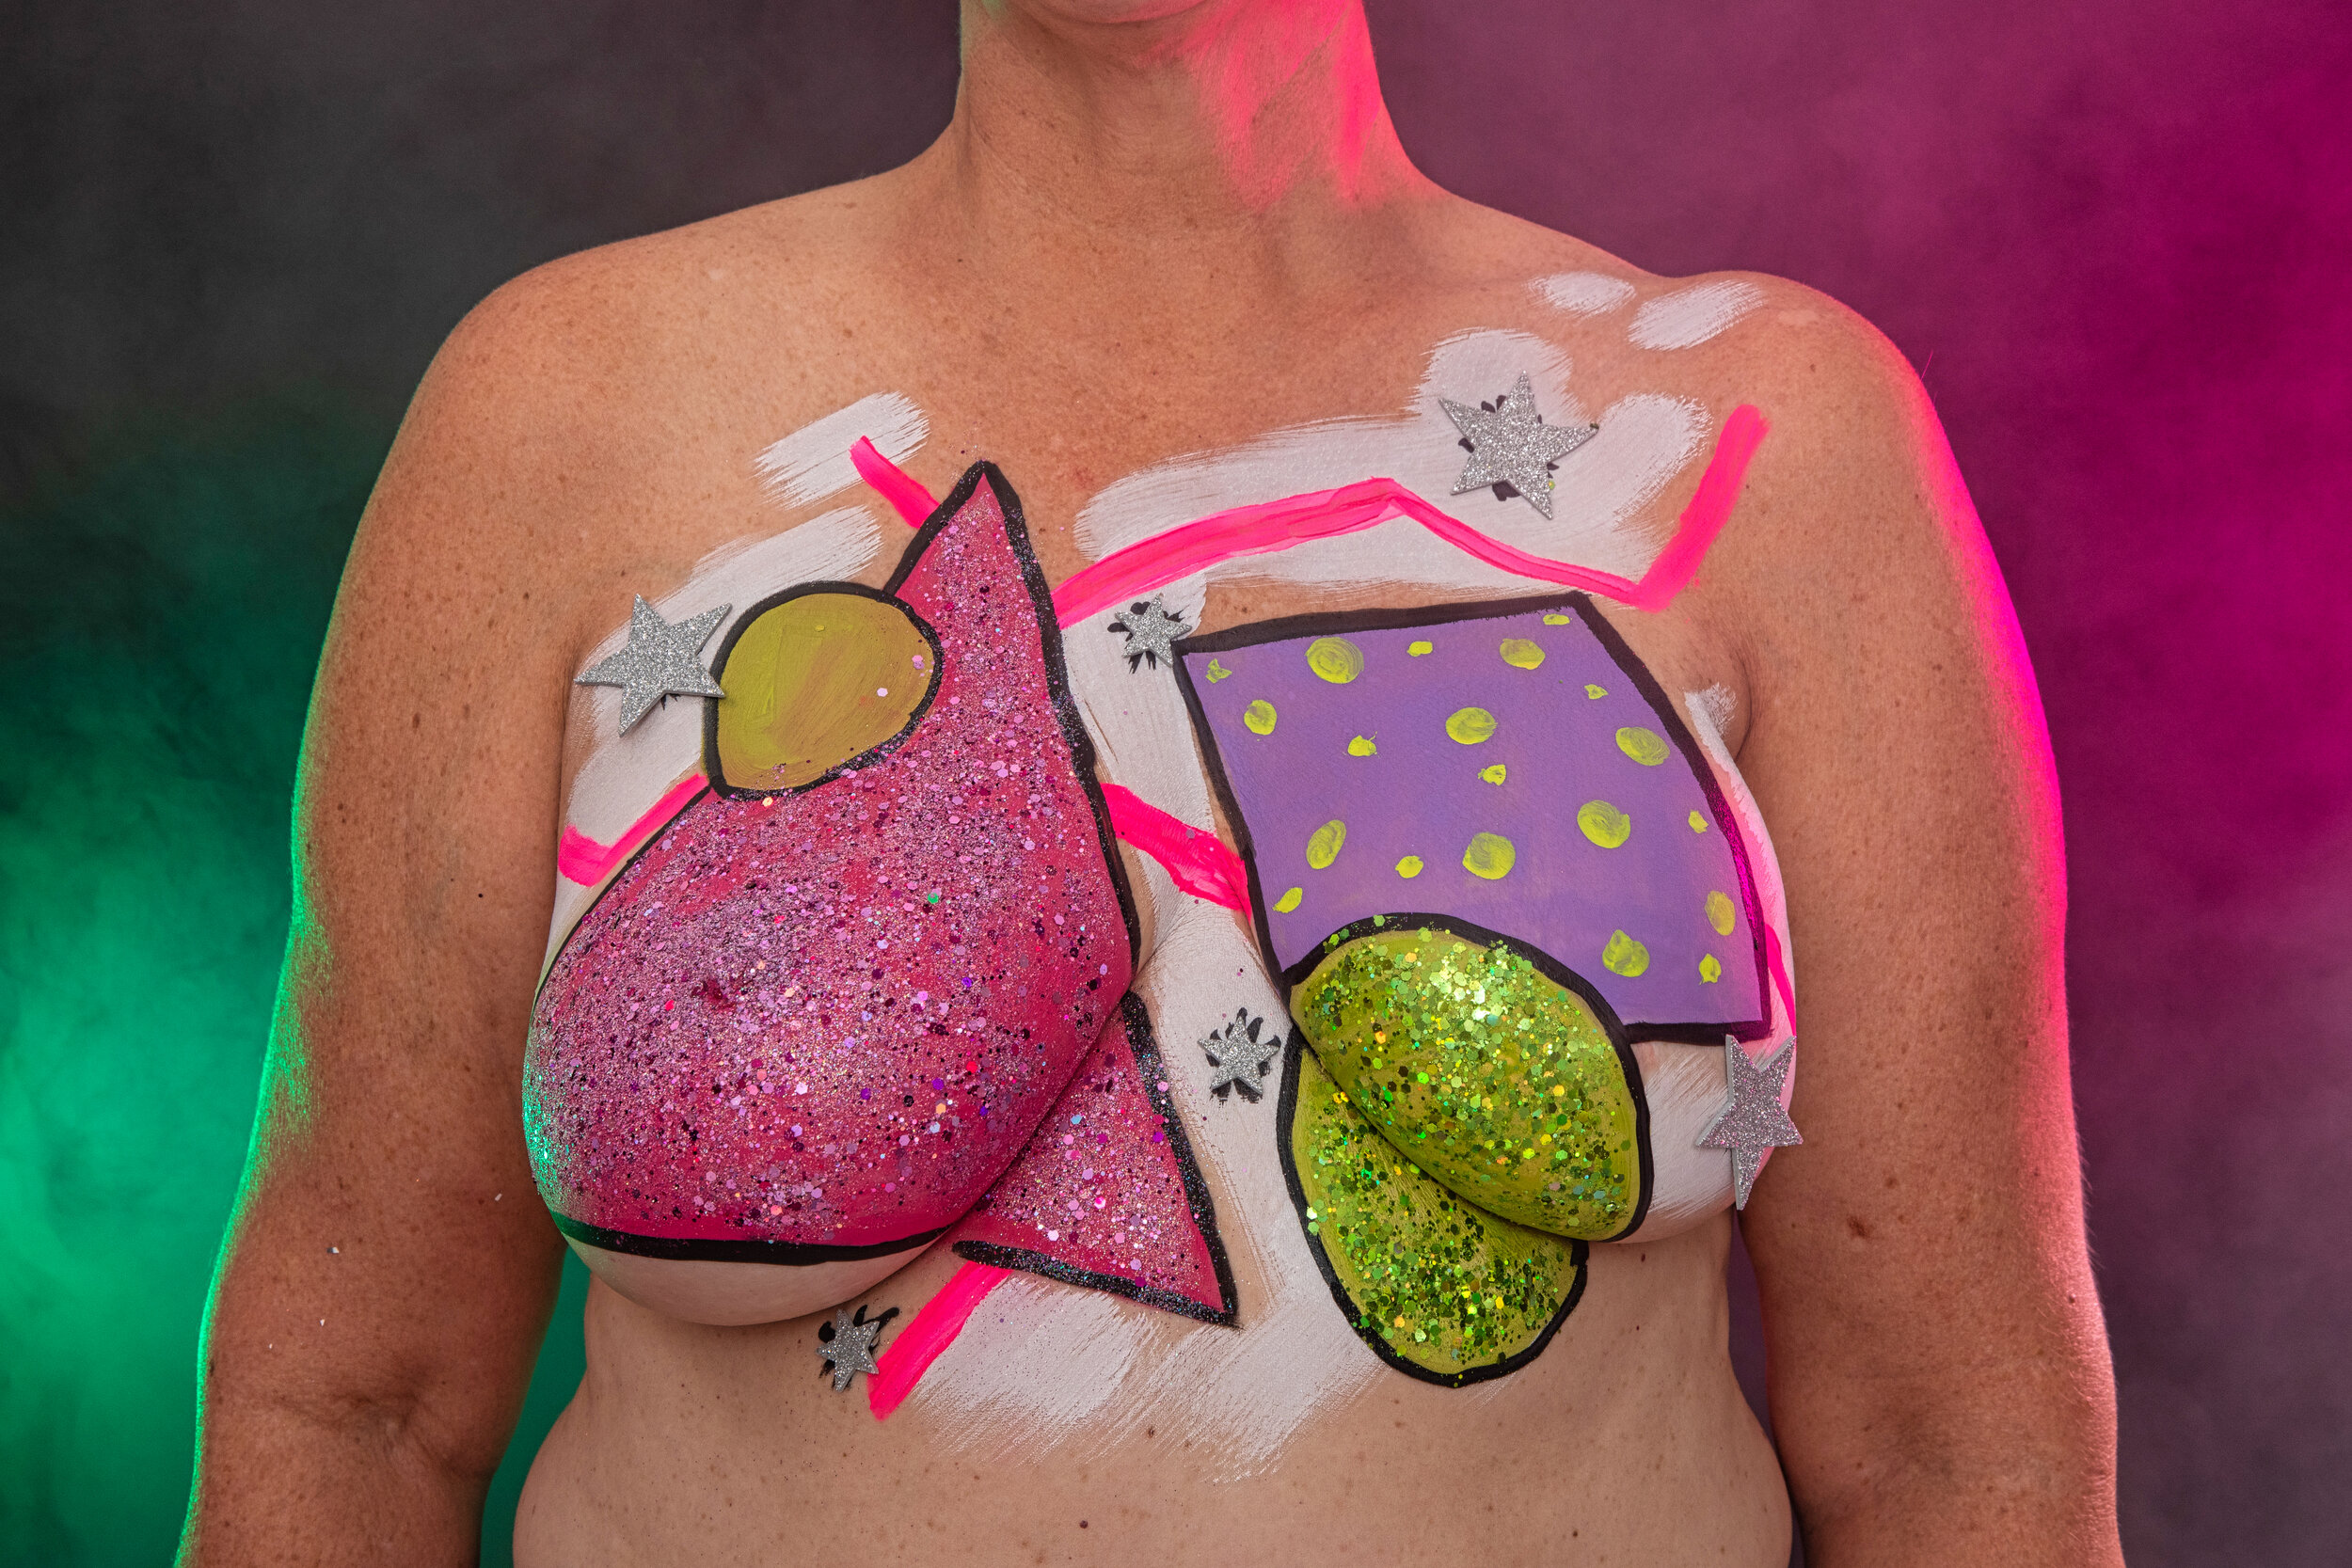 daisy malik recommends boobs painted like easter eggs pic